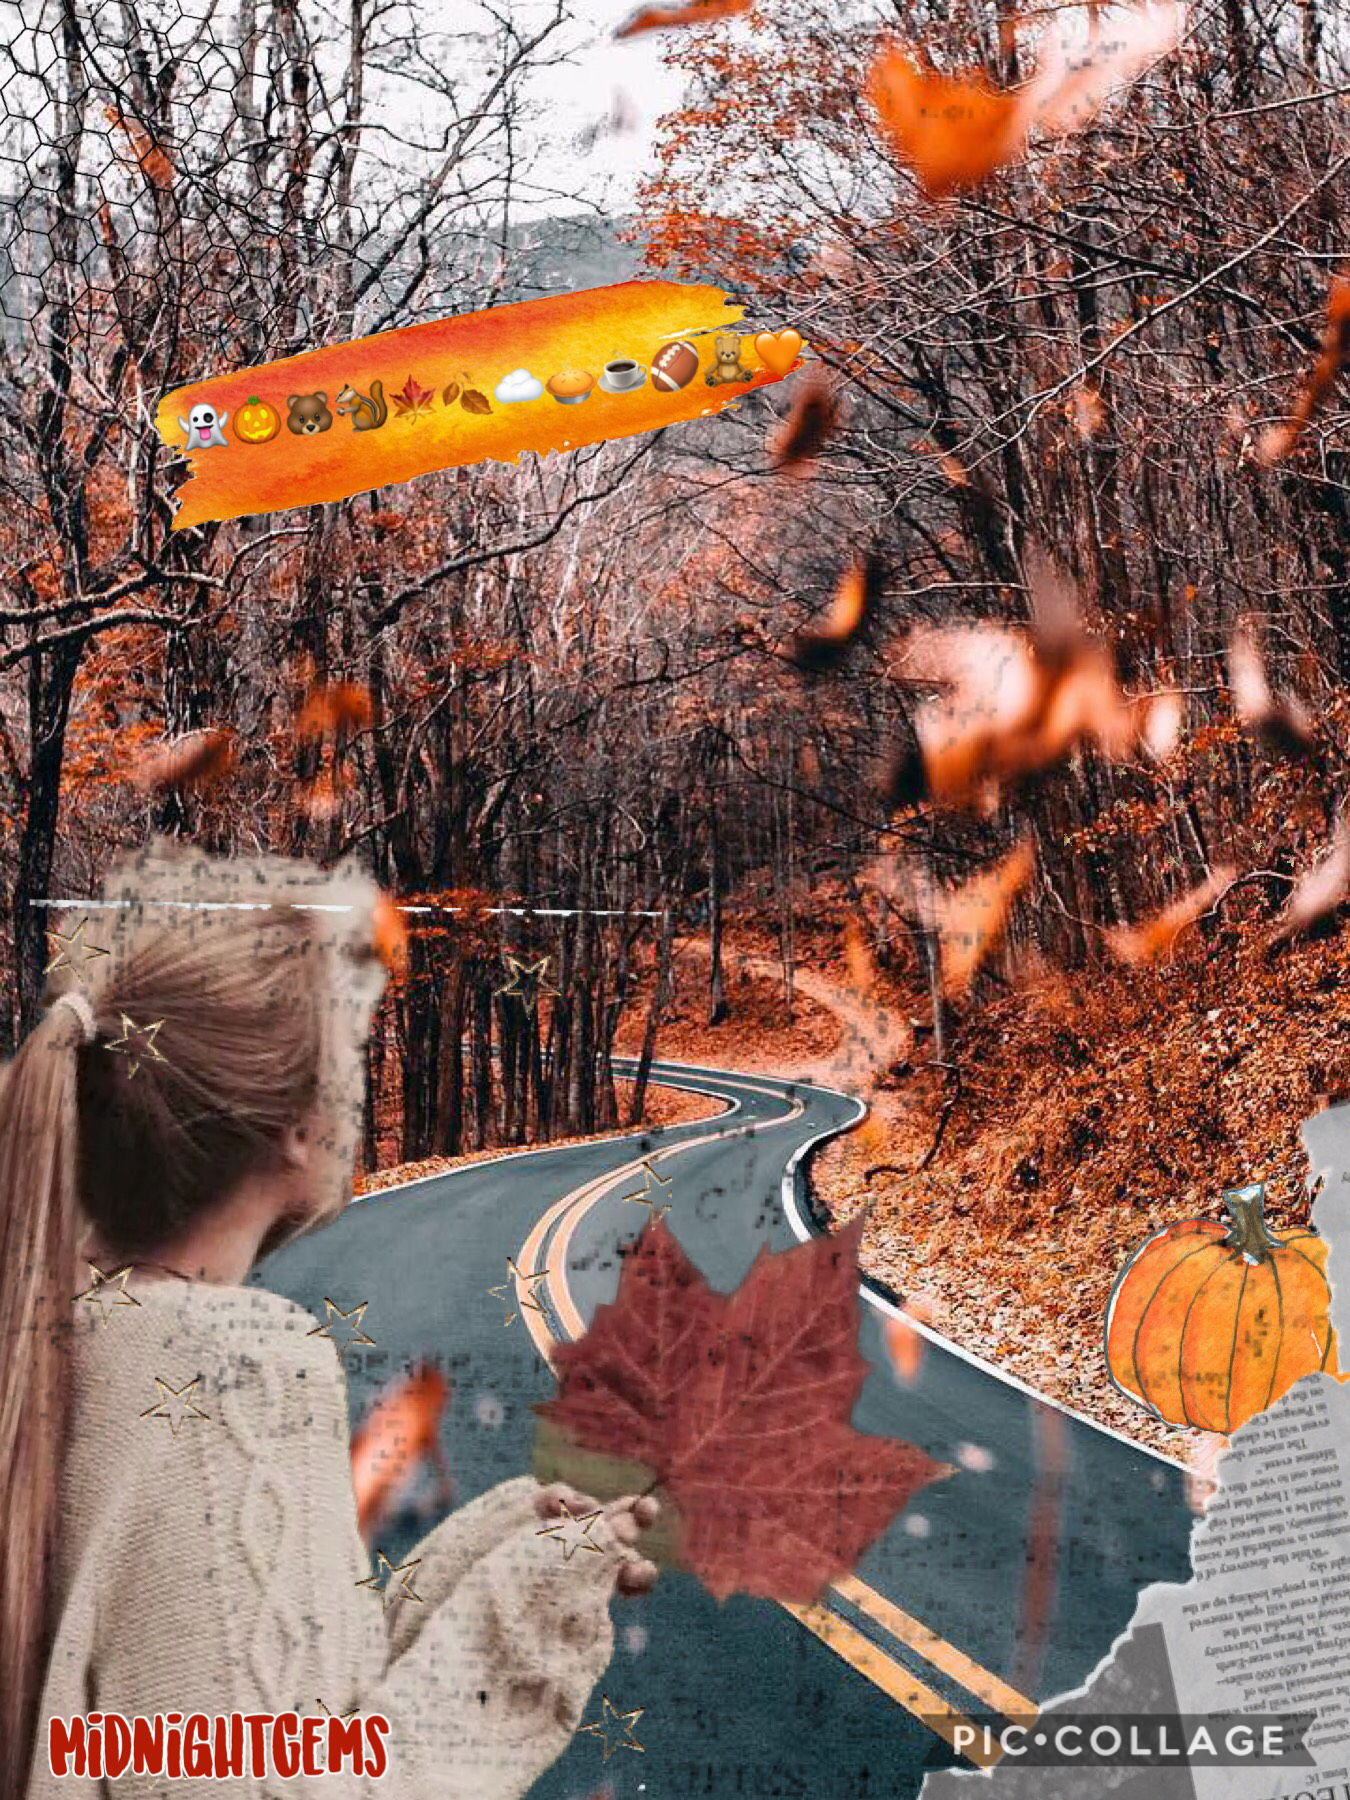 TAP
Pls like and follow! Do you like my new autumn collages? 